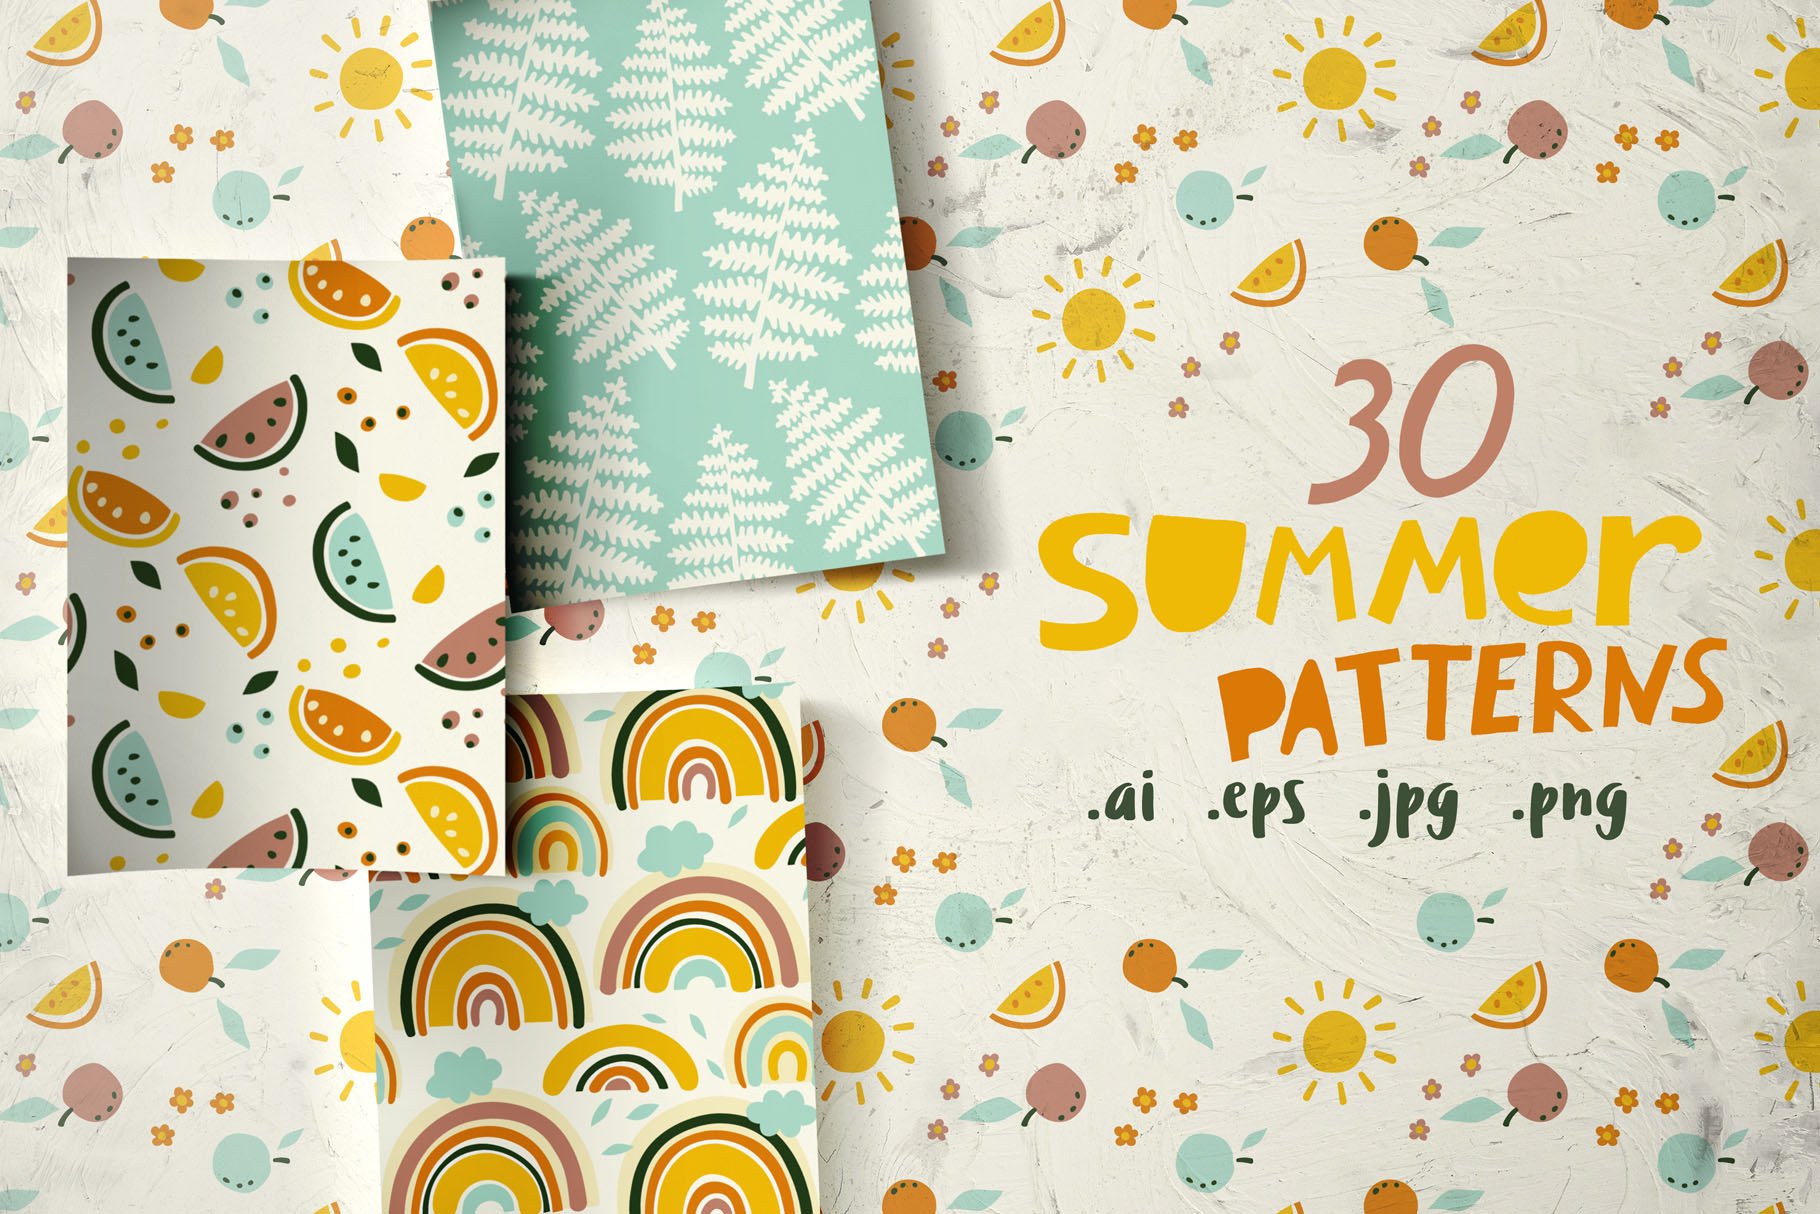 Summer patterns cover image.